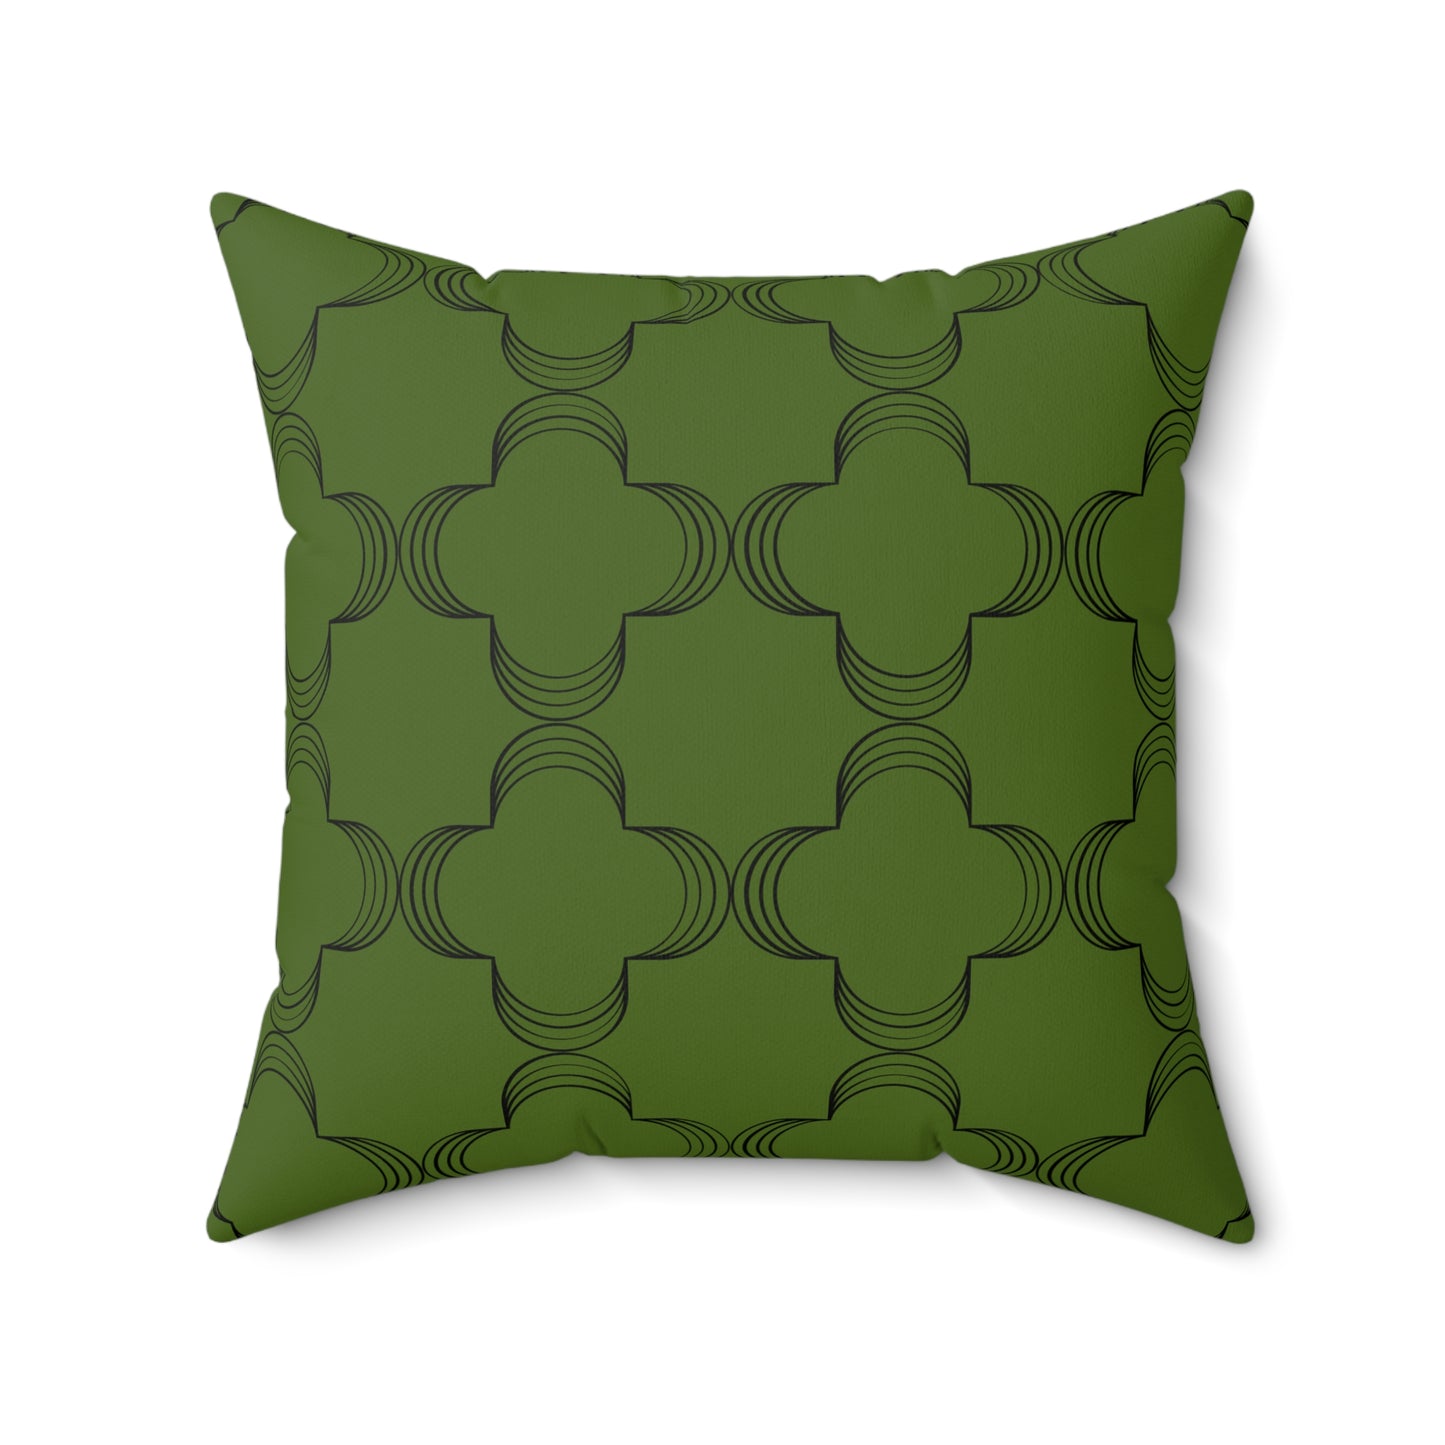 "The Gathering Place" Geometric Throw Pillow